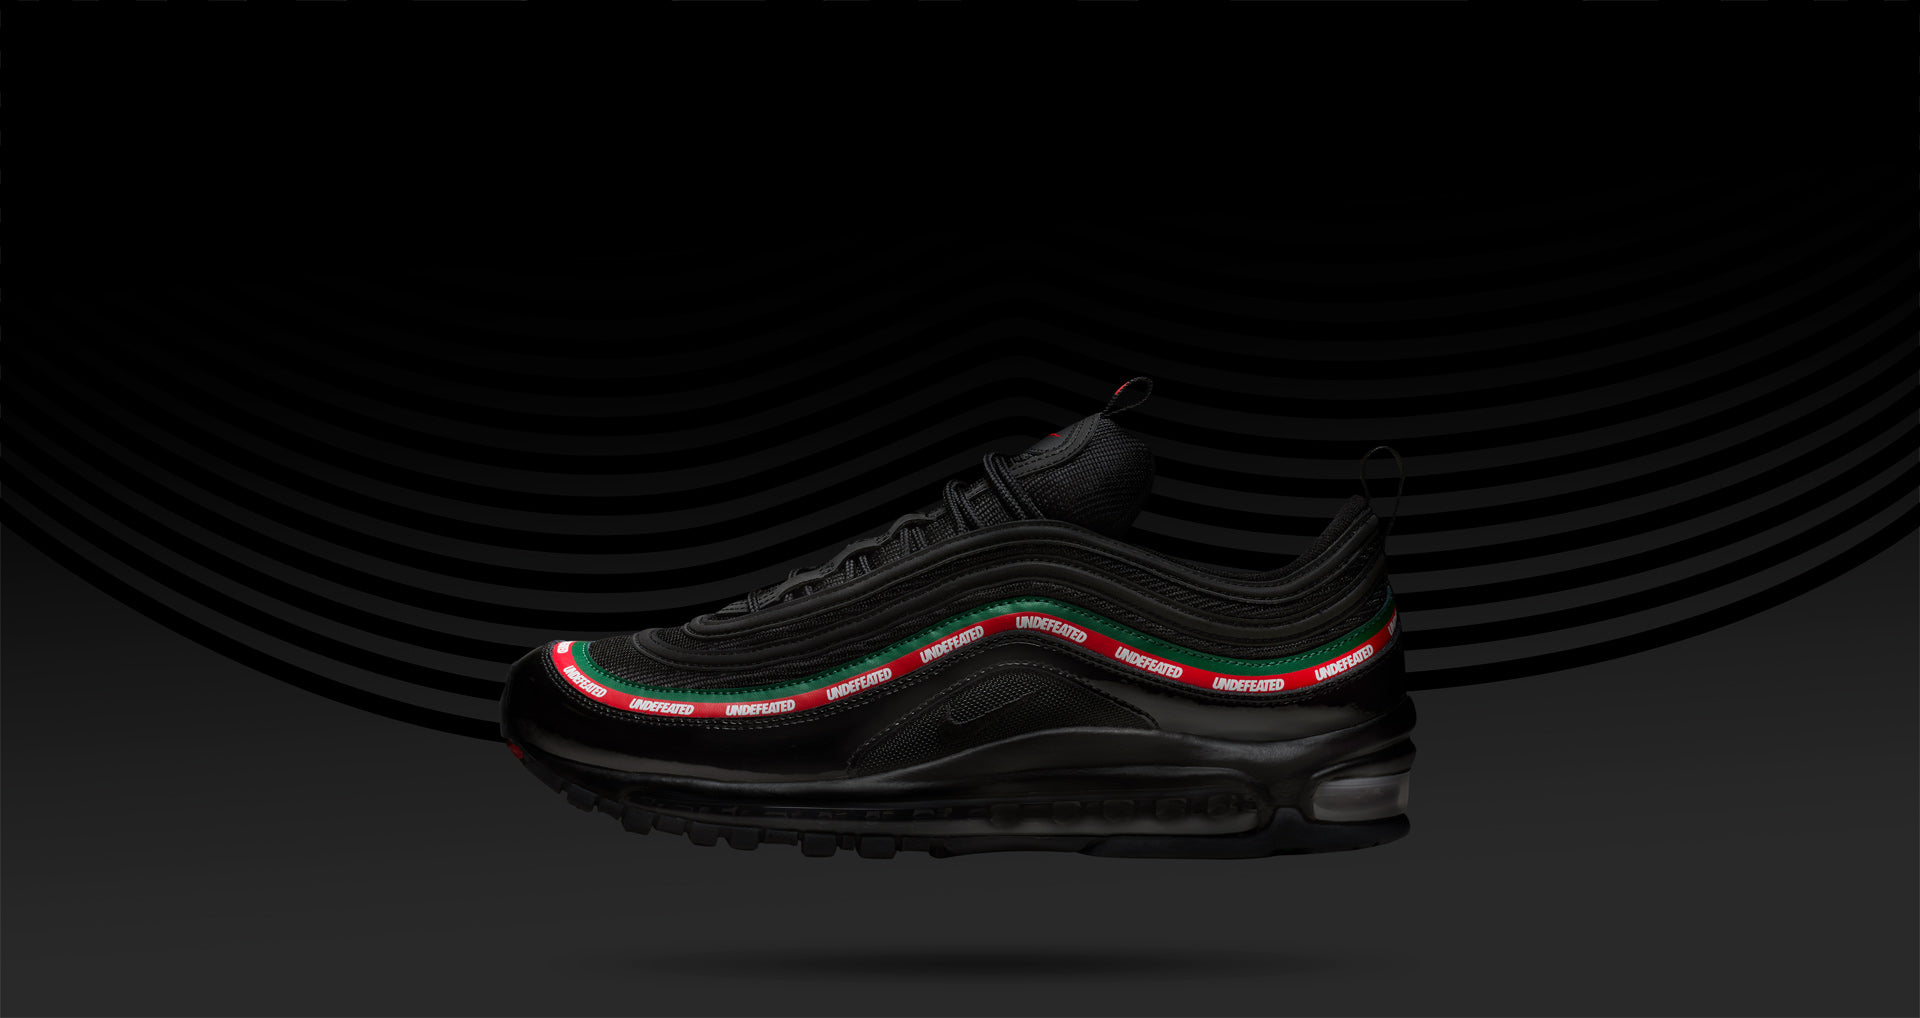 Coming x Undefeated Air Max 97